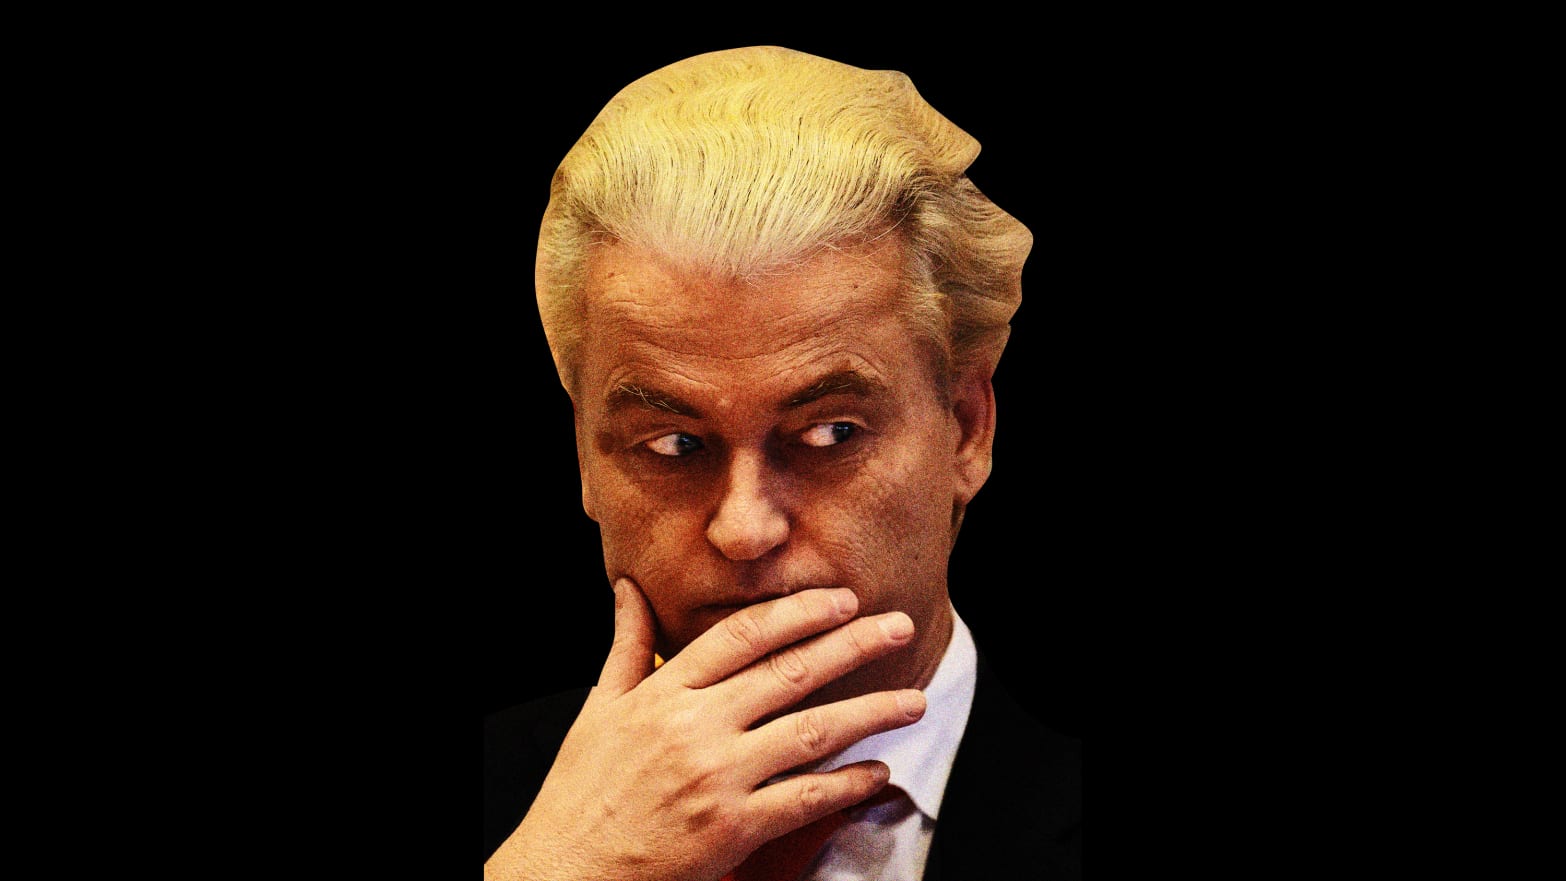 Geert Wilders, Dutch right-wing politician and leader of the Party for Freedom (PVV), attends a meeting in the Dutch parliament